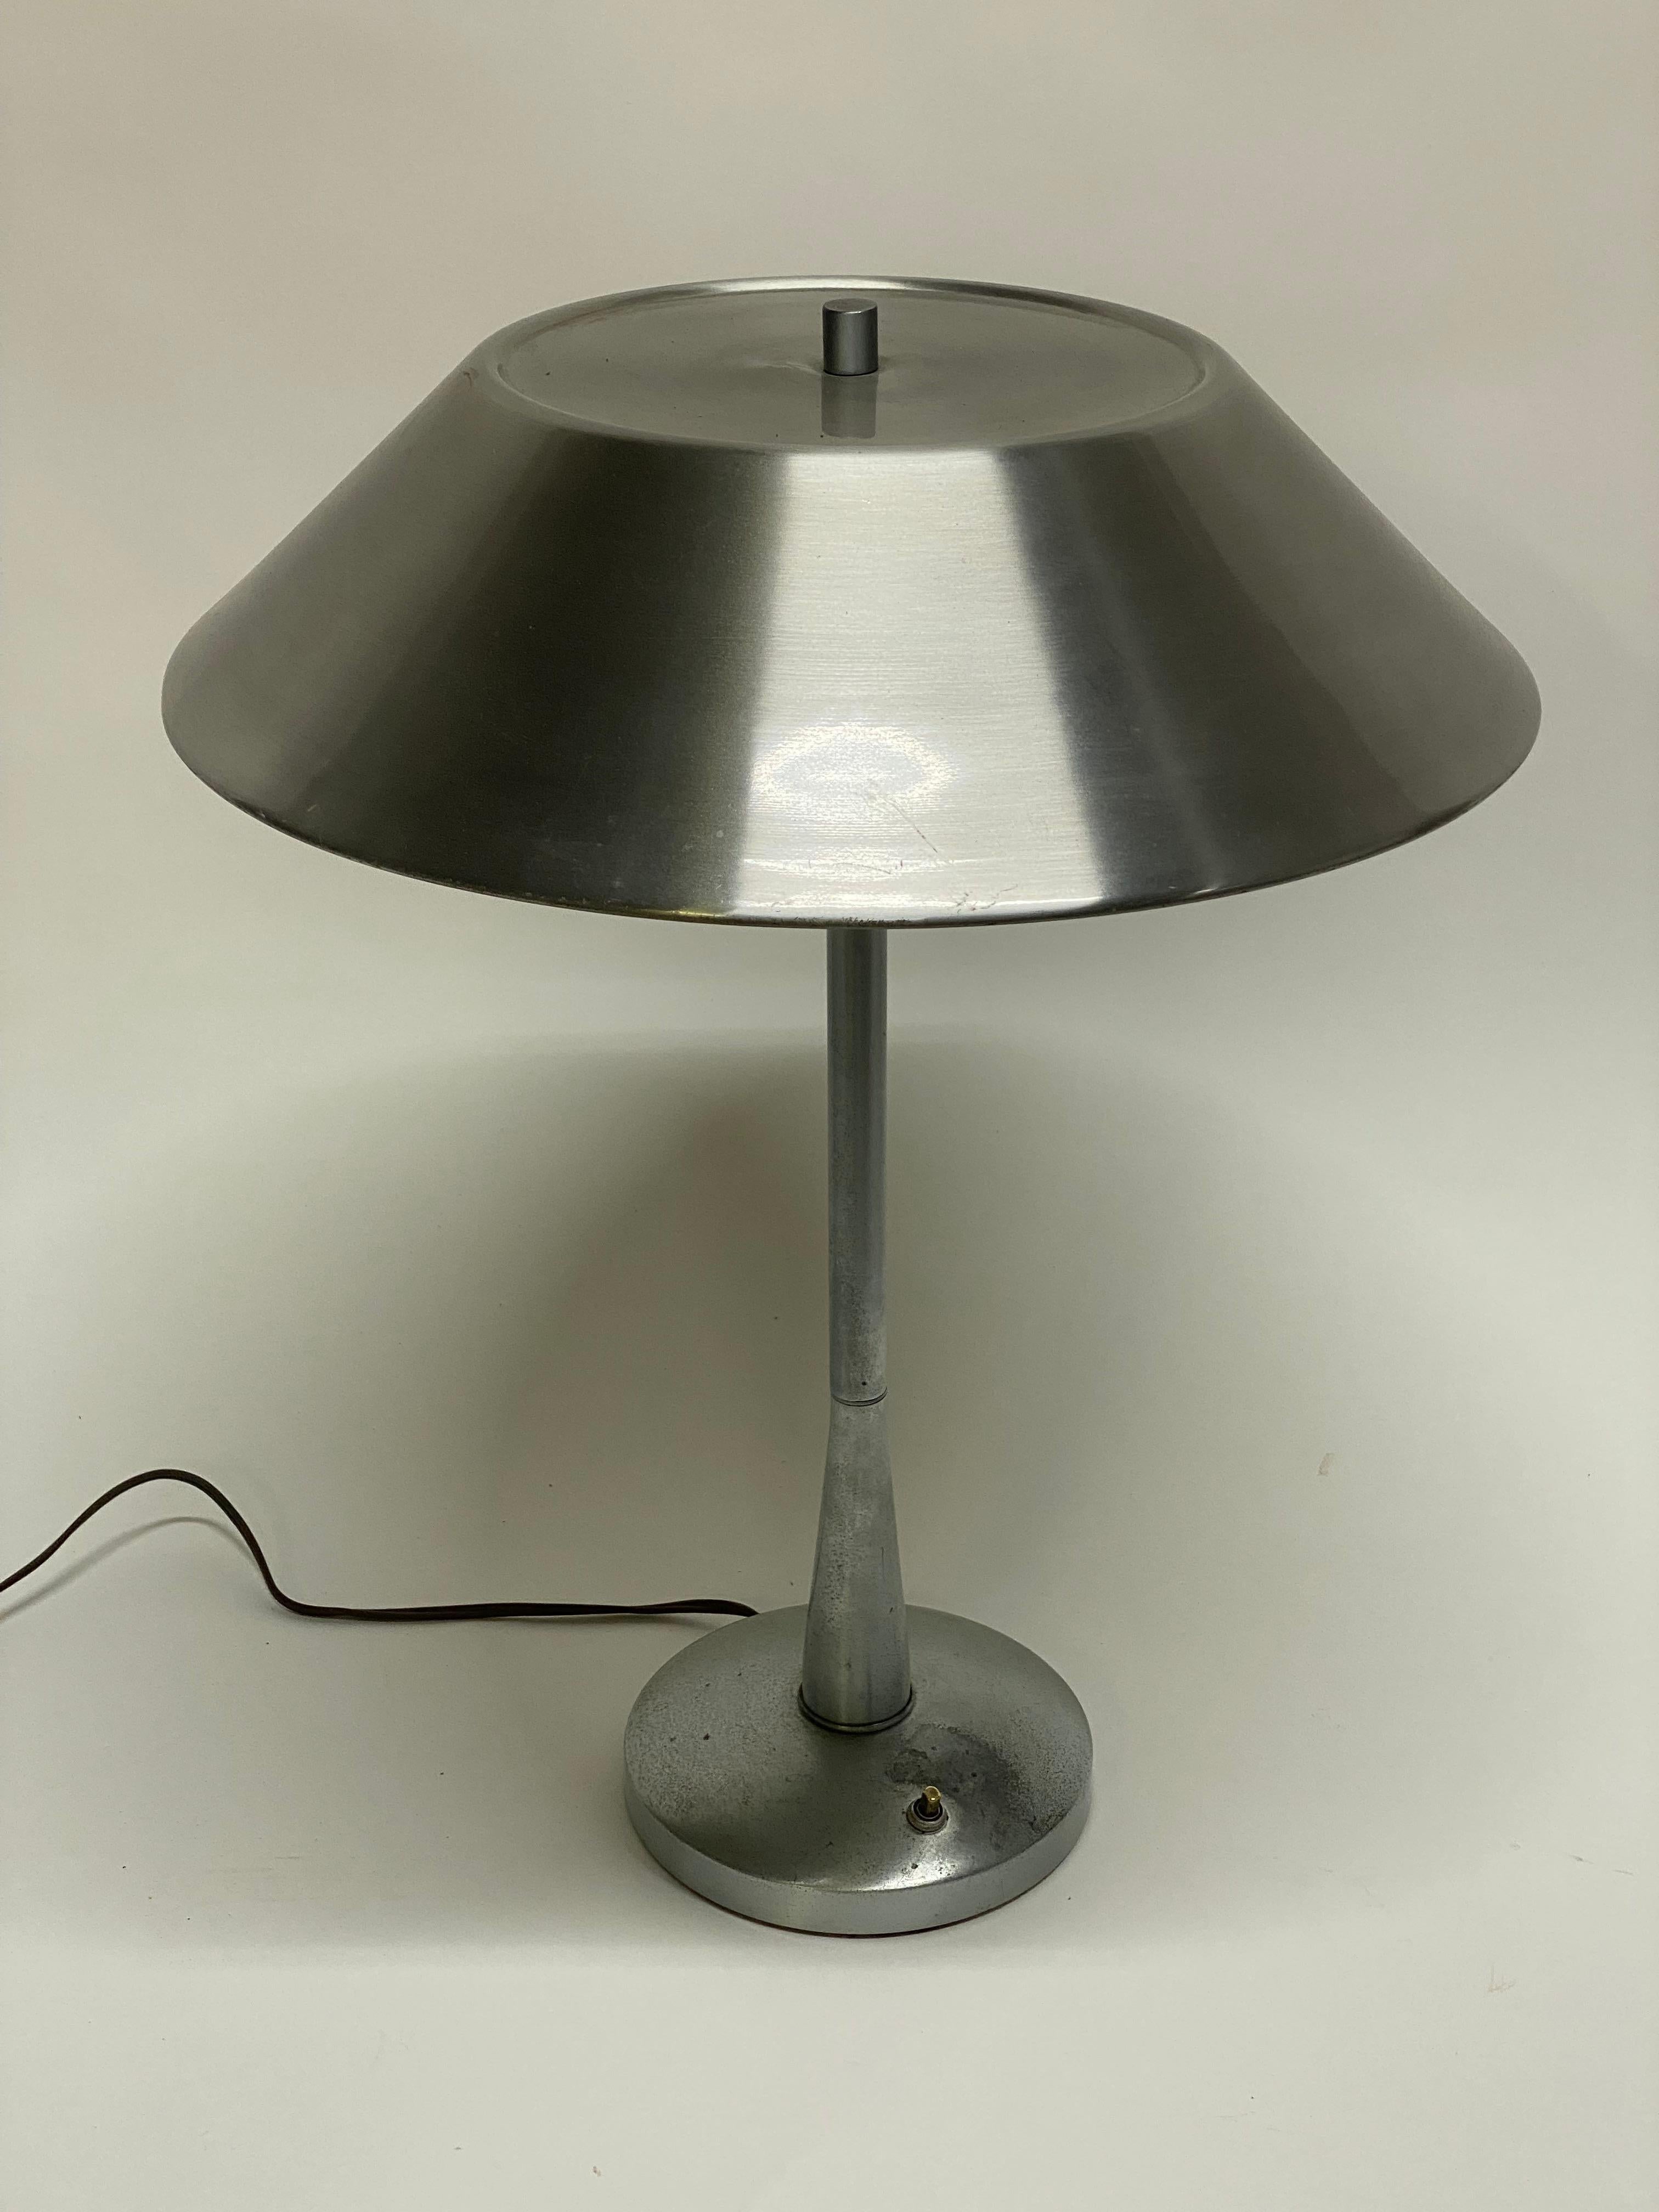 Mutual Sunset aluminum table lamp. Featuring a tapered shaft, light diffuser, double light sockets and a 